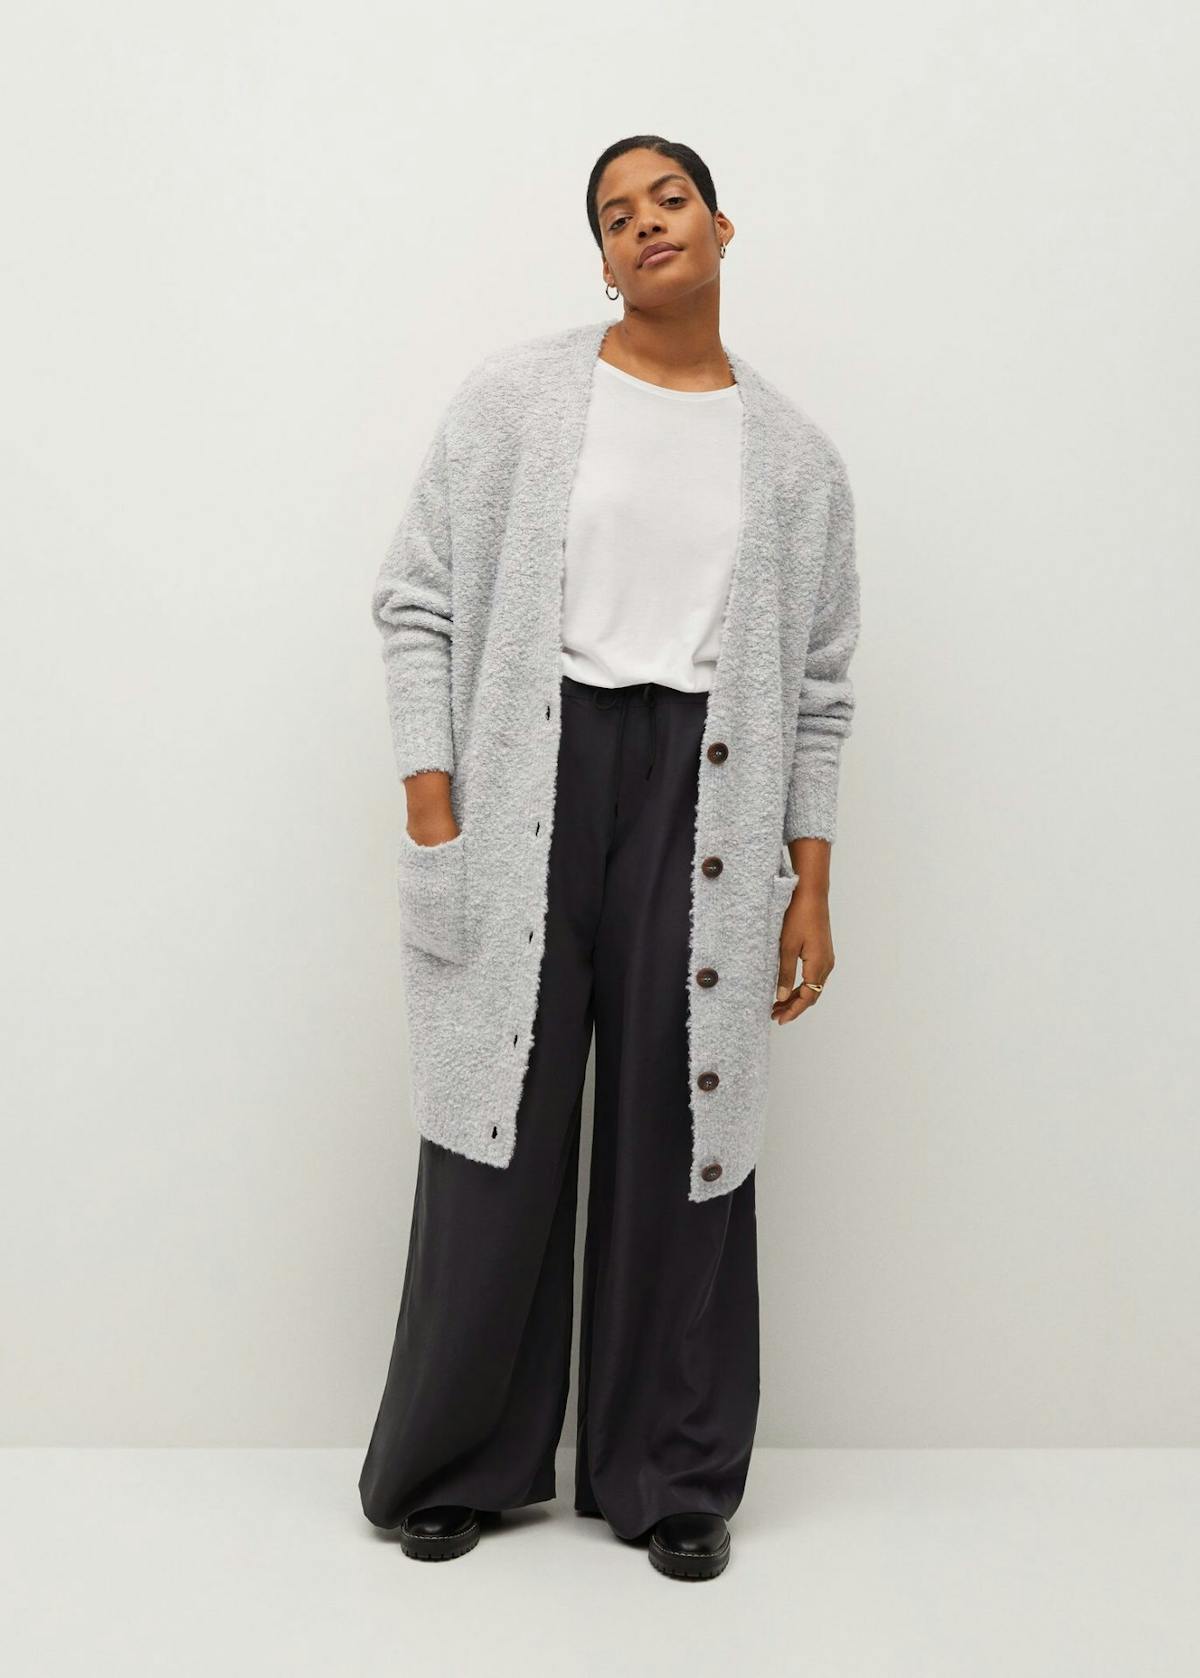 11 best maxi cardigans for winter